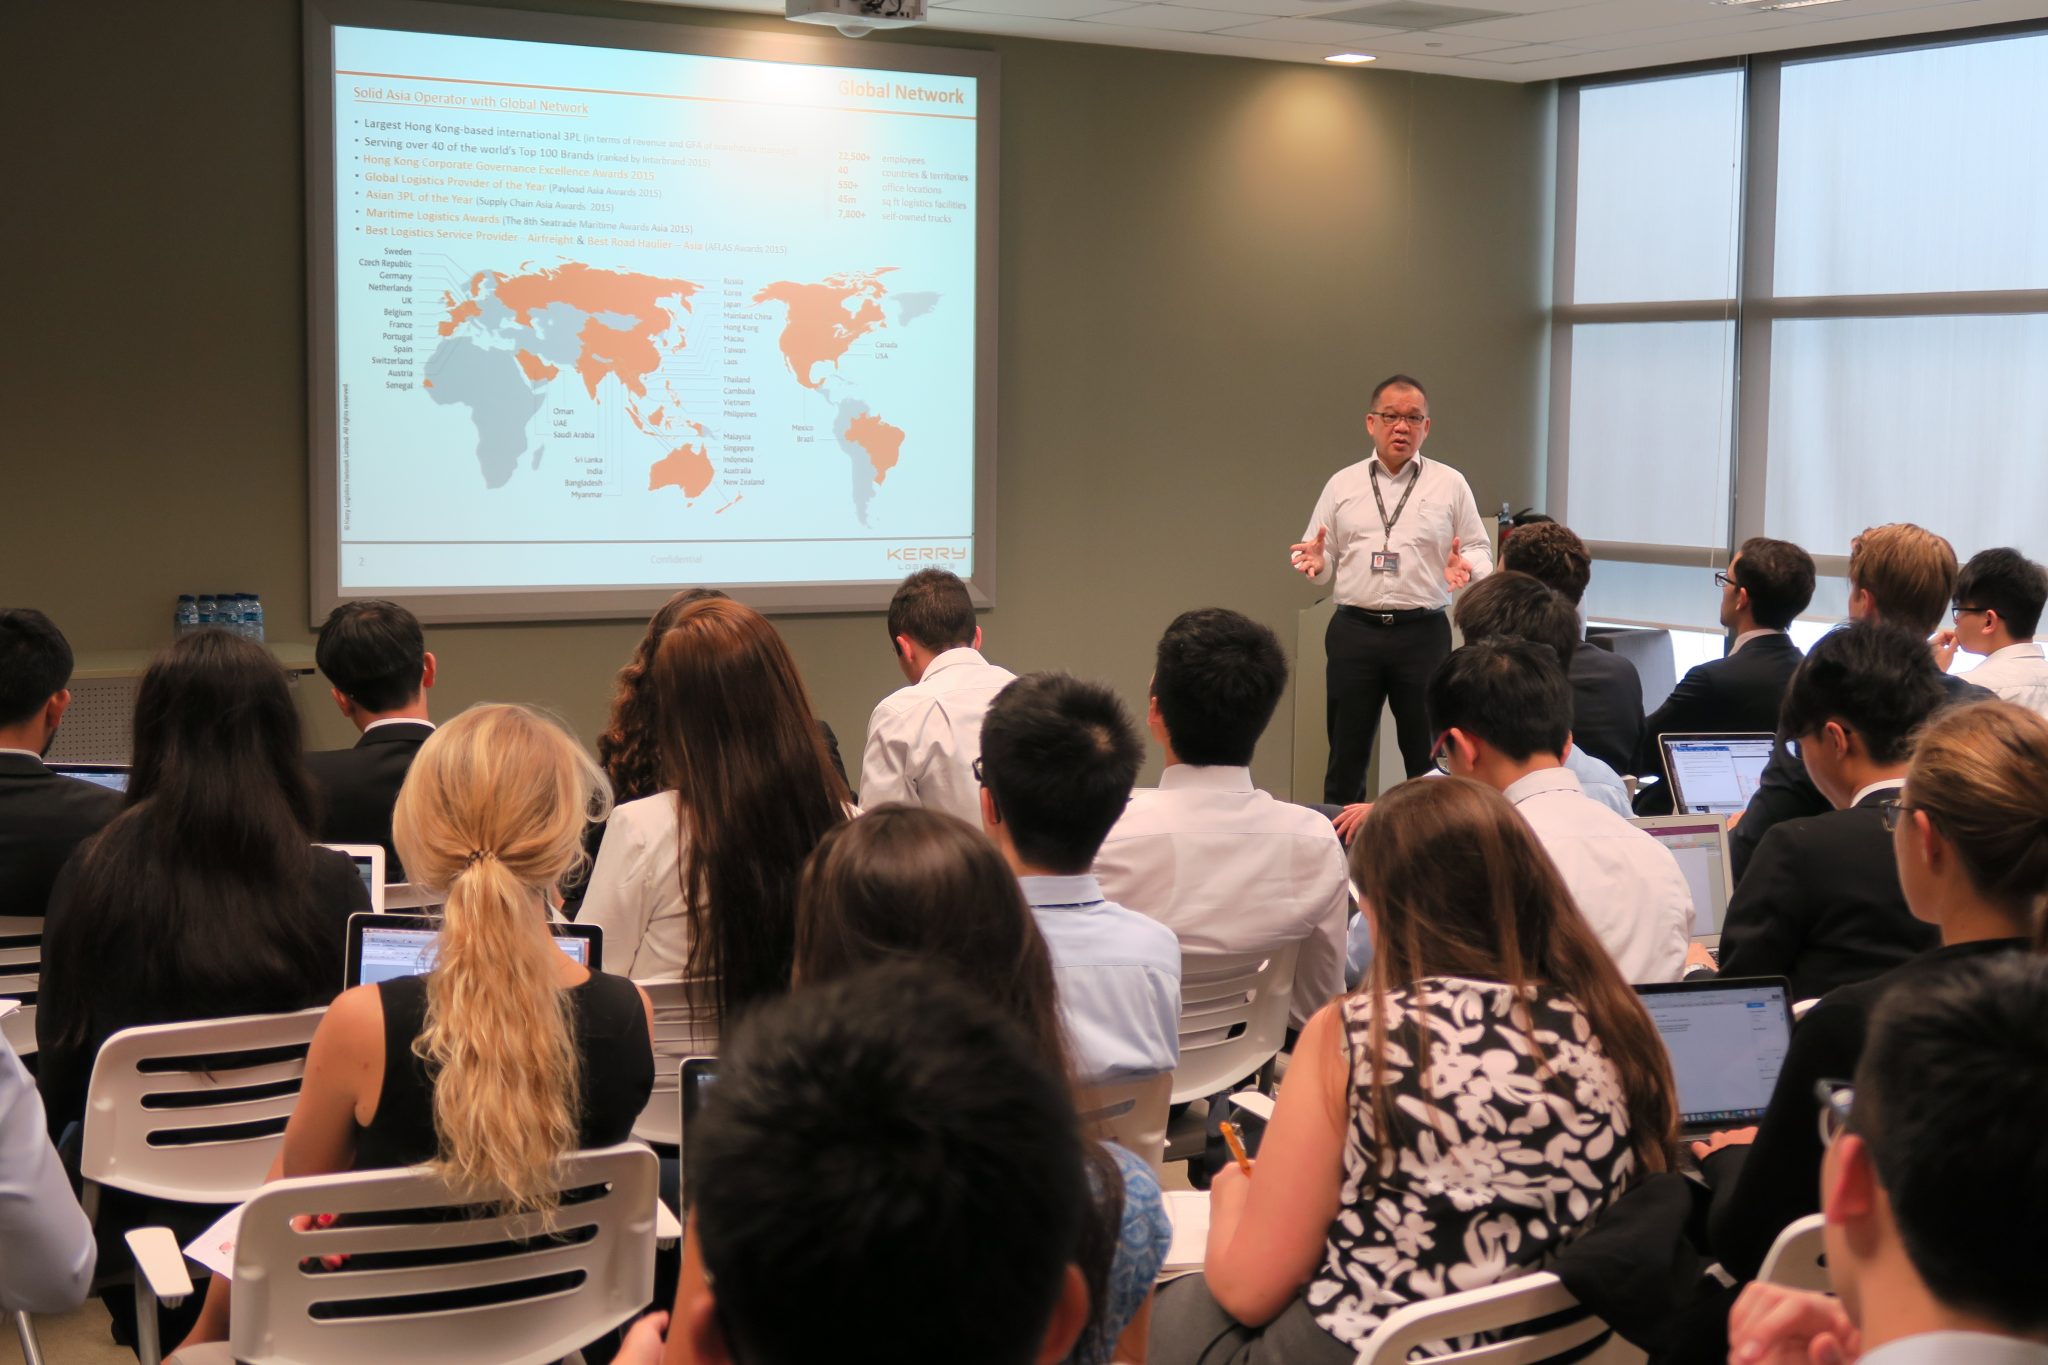 The group visited Kerry Logistics in Singapore where the director shared his insights and experiences.